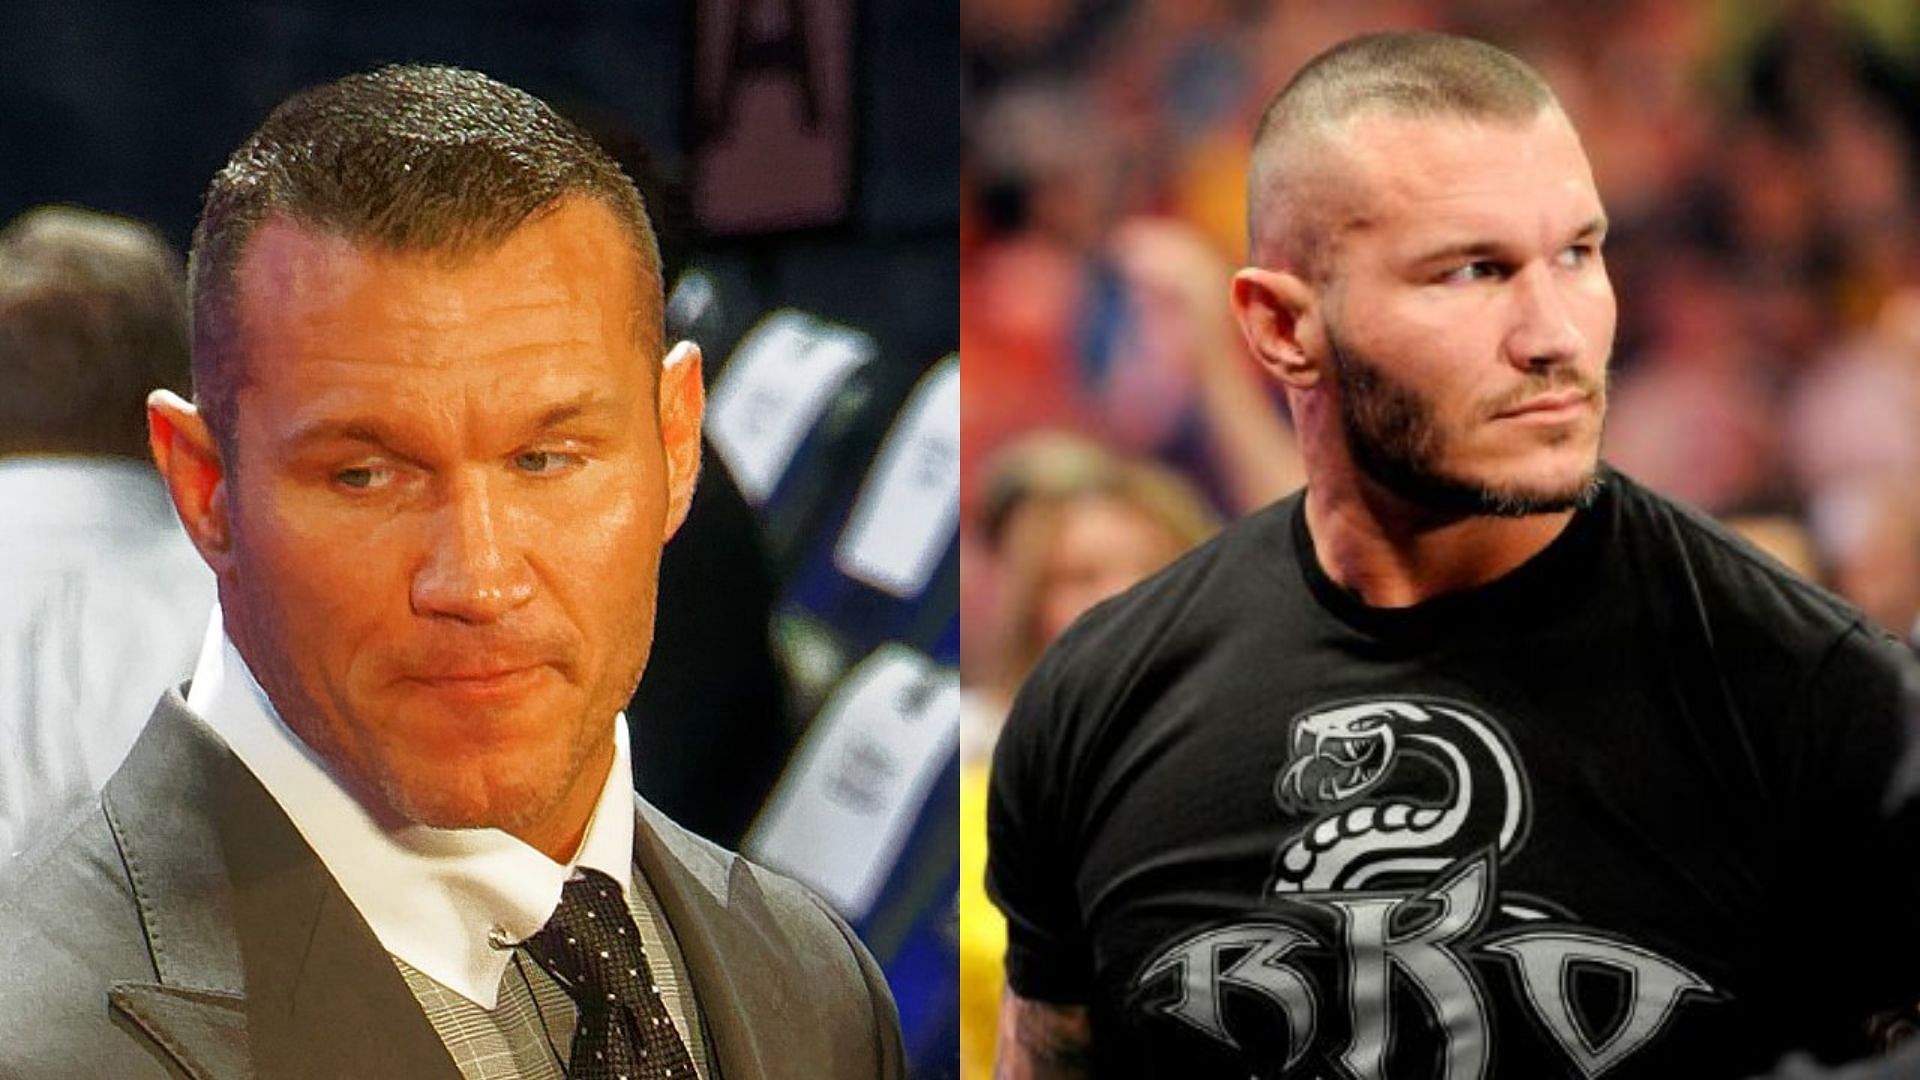 Randy Orton has been gone from WWE TV for a while now